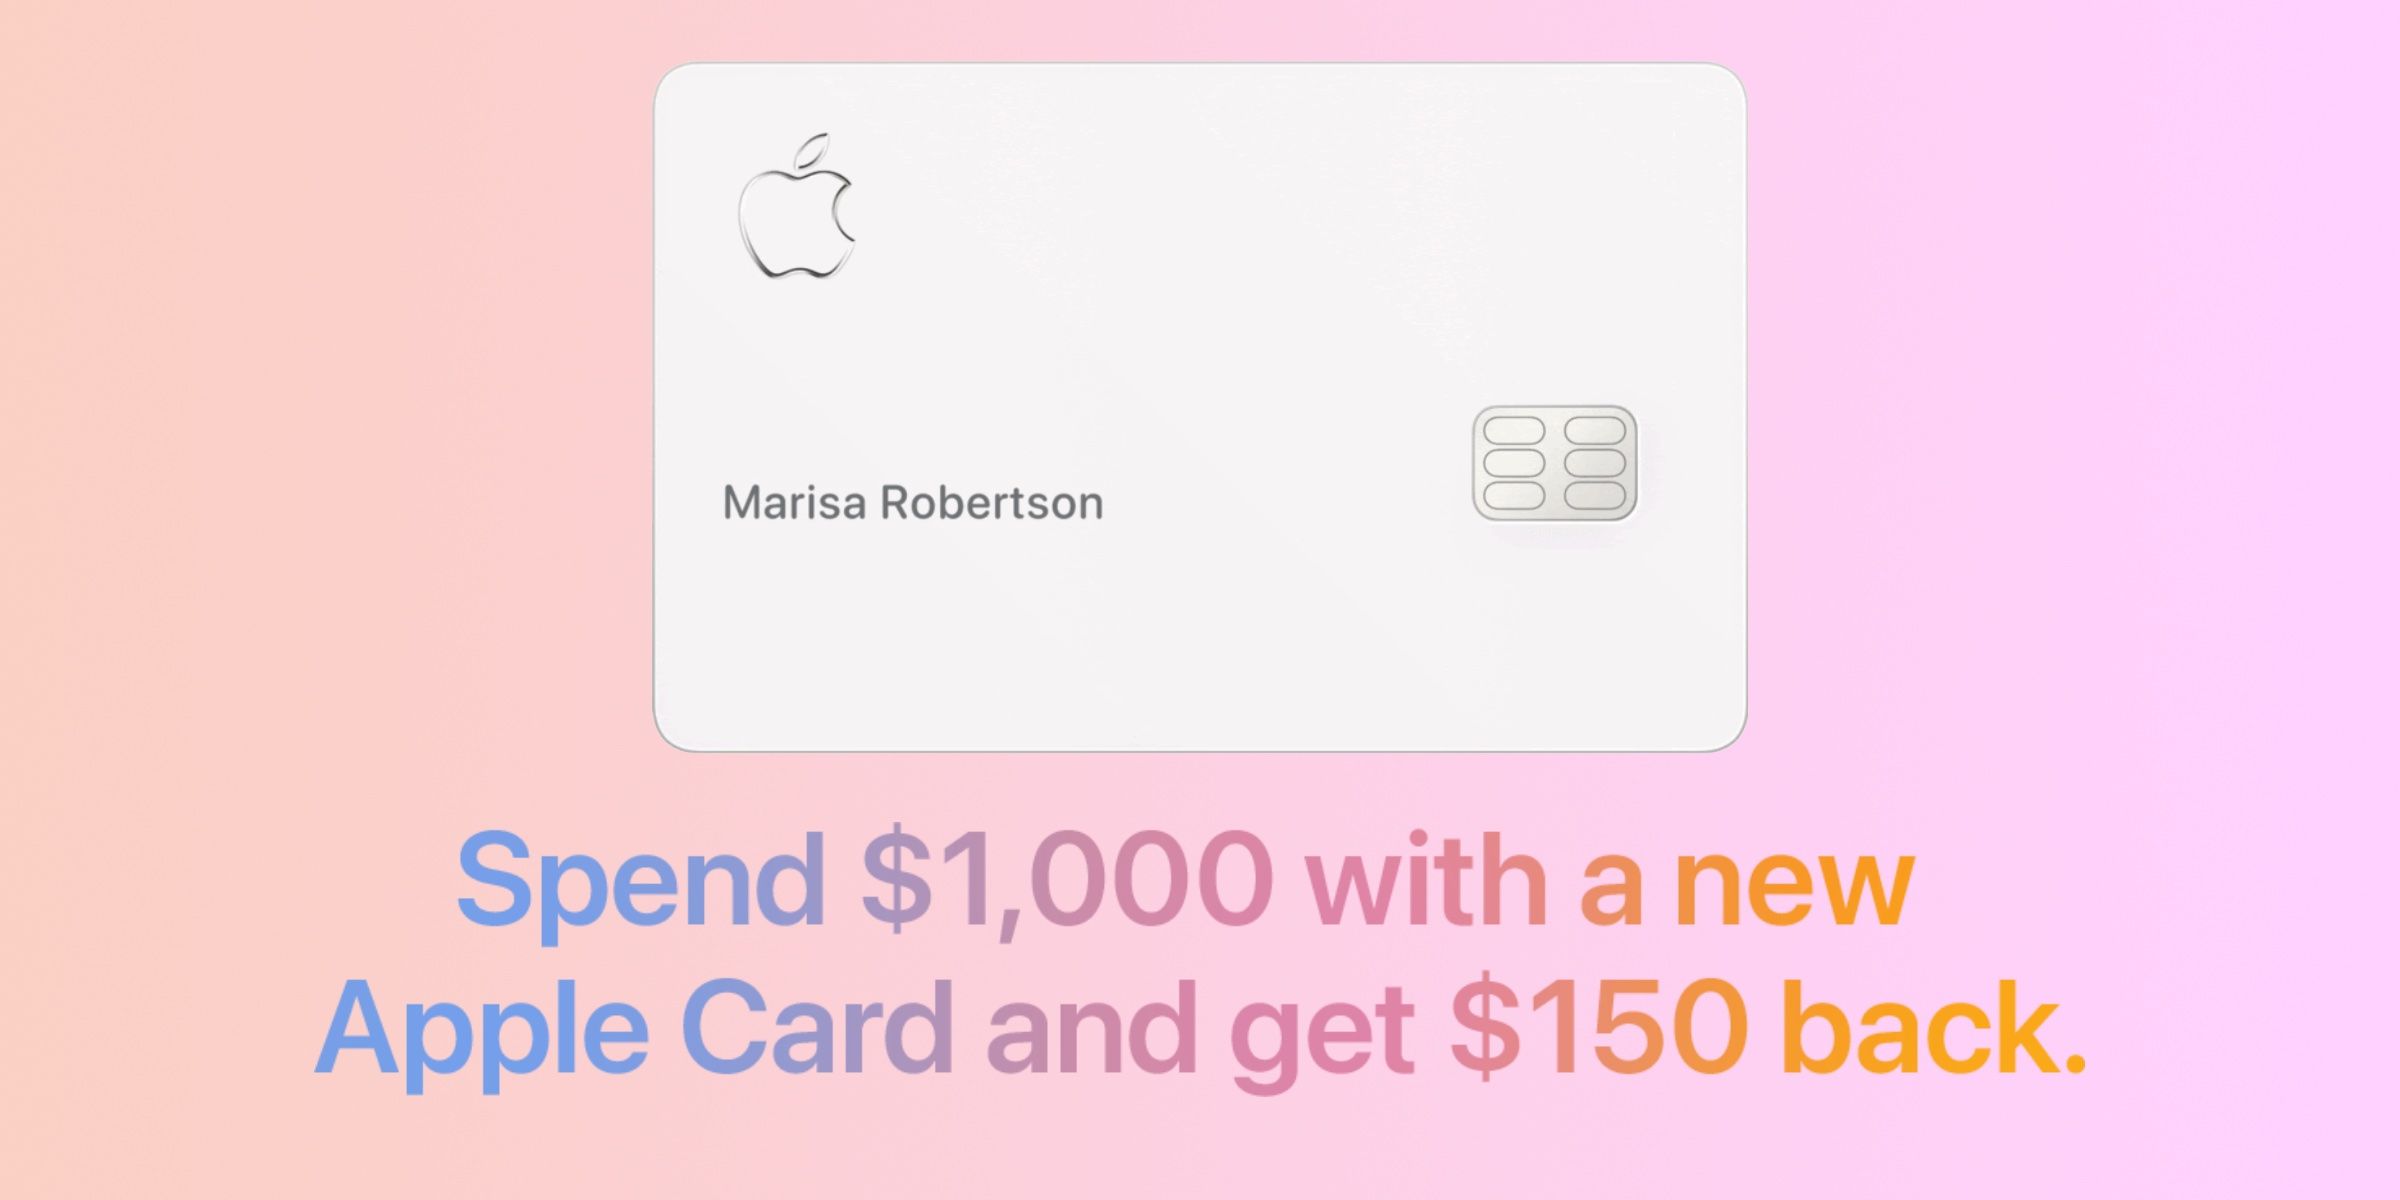 A titanium Apple Card against a pink and purple gradient background.